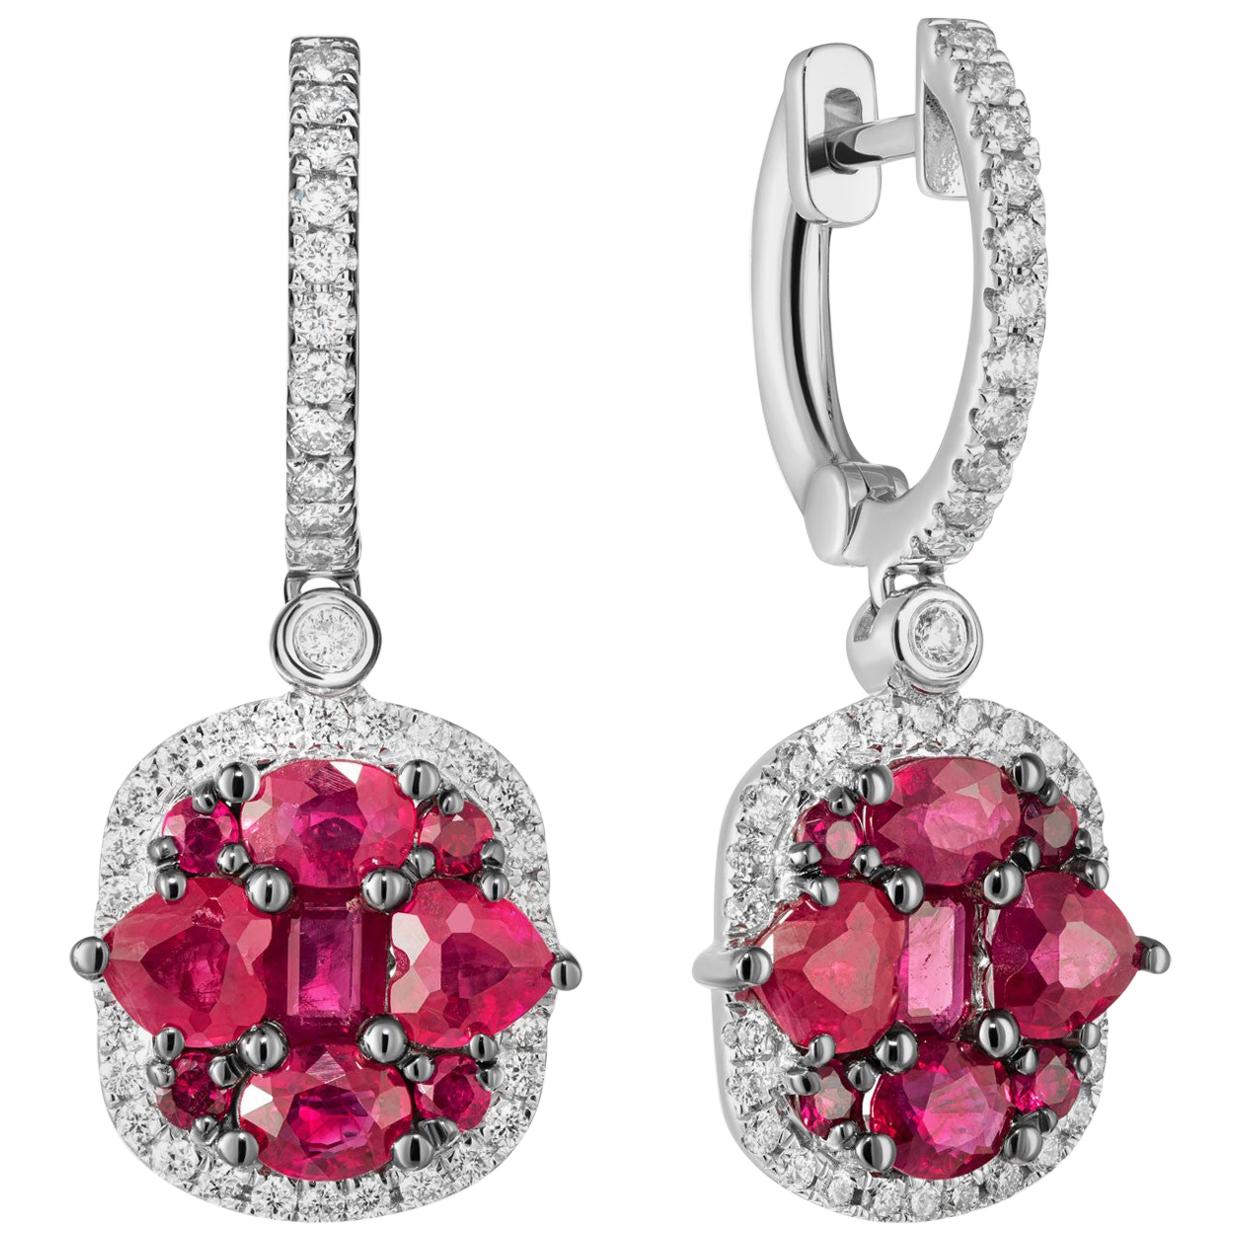 Earrings White Gold 14 K (Matching Ring Available)
Diamond 76-RND 57-0,47-4/6
Ruby 8-RND 0,07 (5)/4
Ruby 4-Oval-0,54 (5)/4
Ruby 4-2,03 (5)/4
Ruby 2-0,32 (5)/4
Weight 6,61 grams


With a heritage of ancient fine Swiss jewelry traditions, NATKINA is a